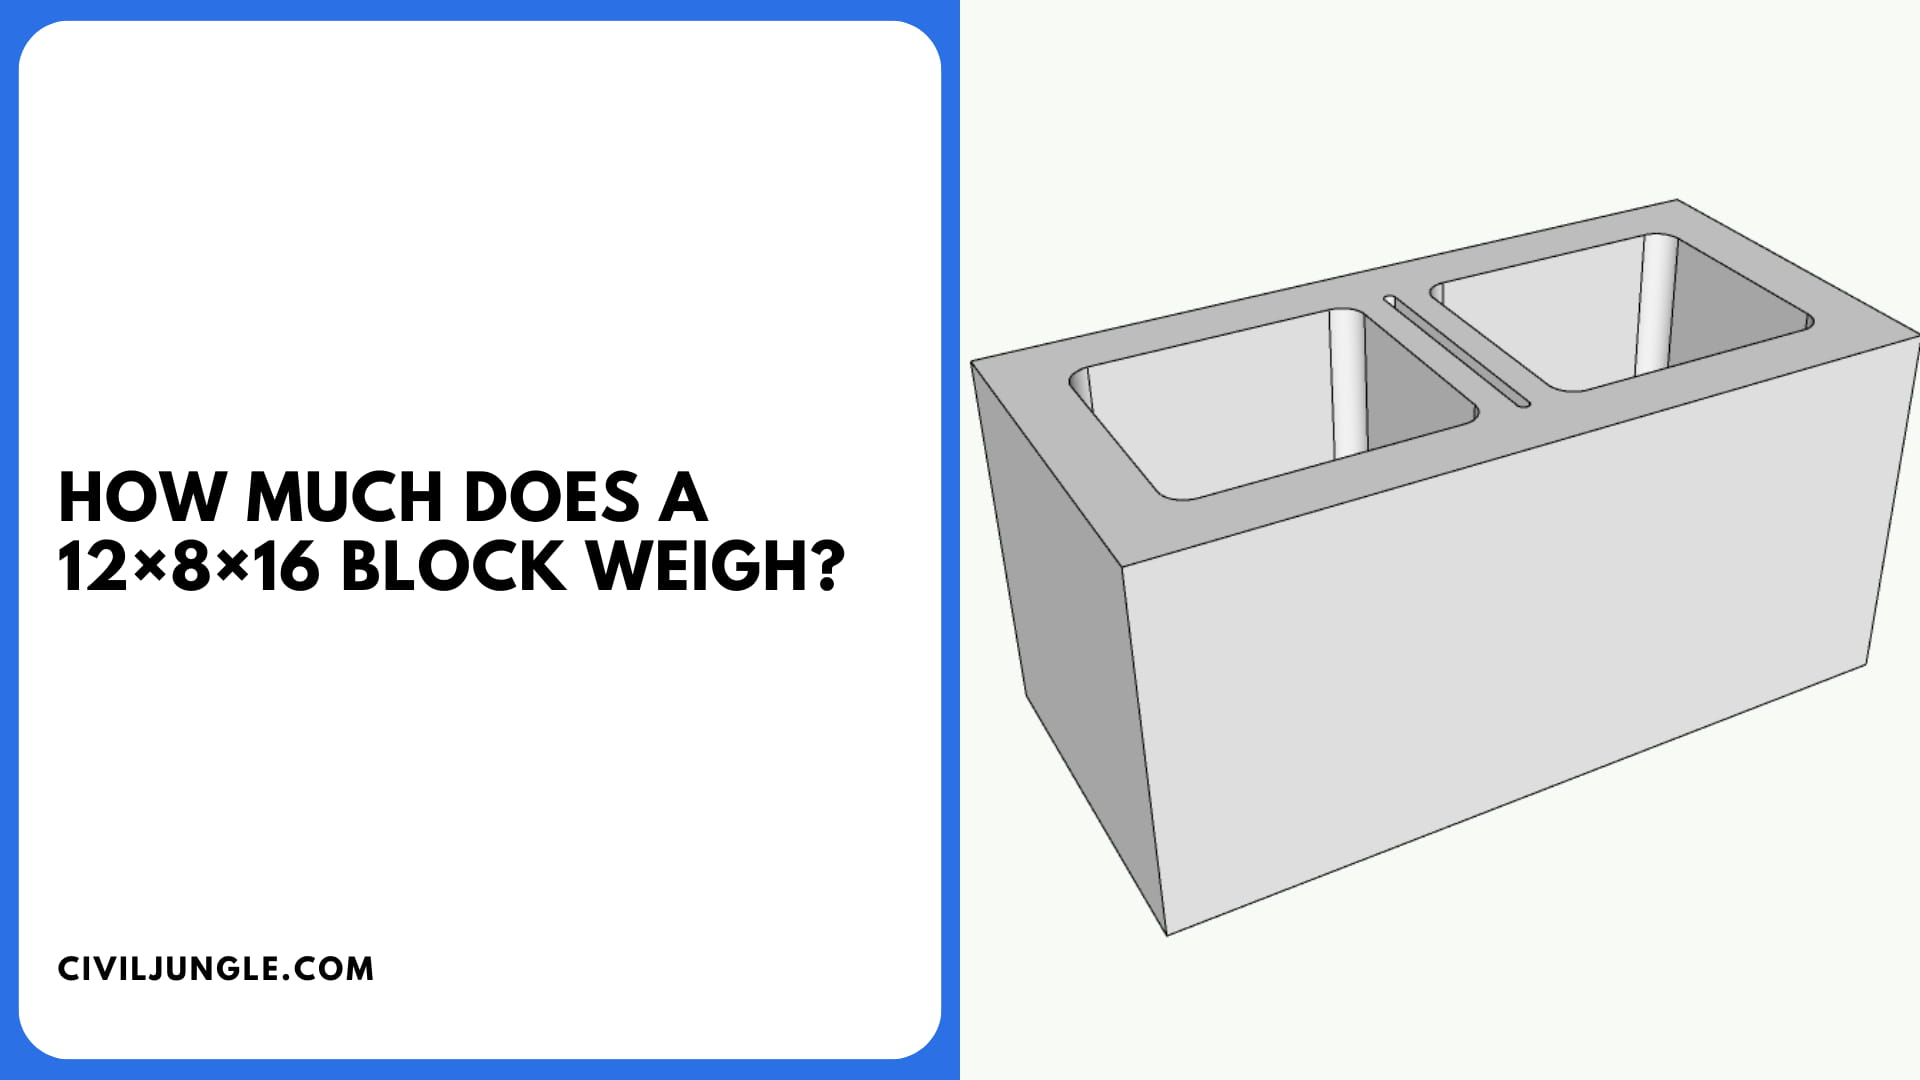 How Much Does a 12×8×16 Block Weigh?